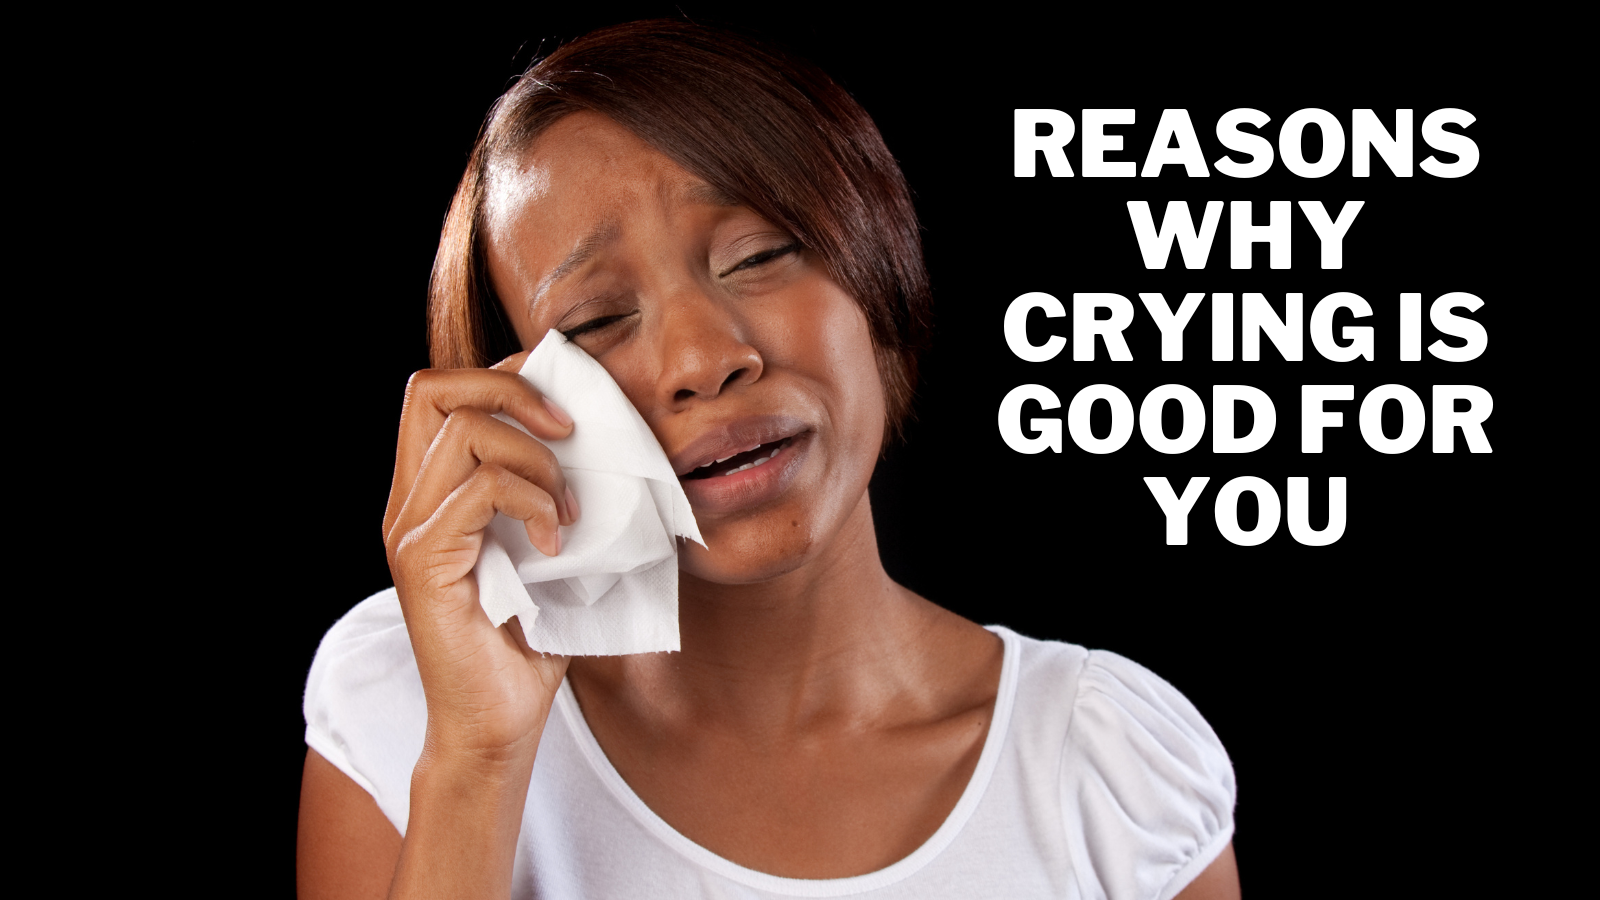 Reasons Why Crying Is Good For You